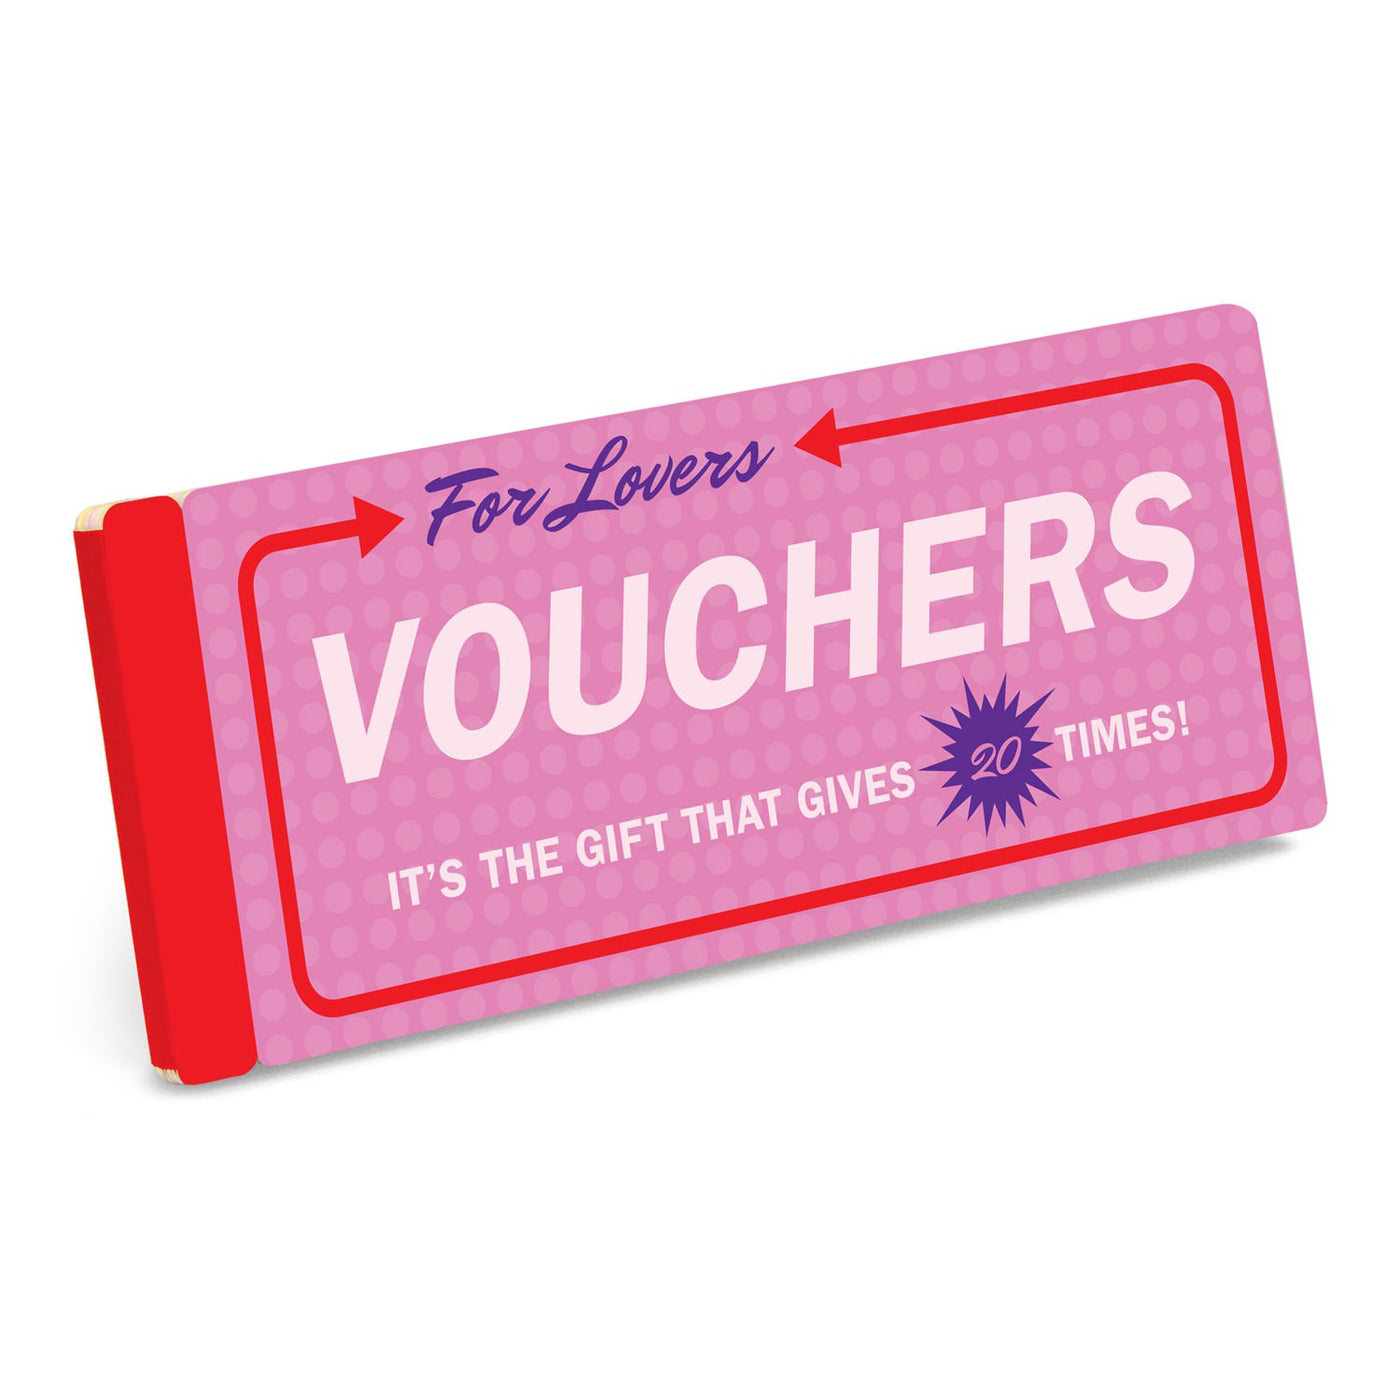 Vouchers for Lovers | Atlas Stationers.